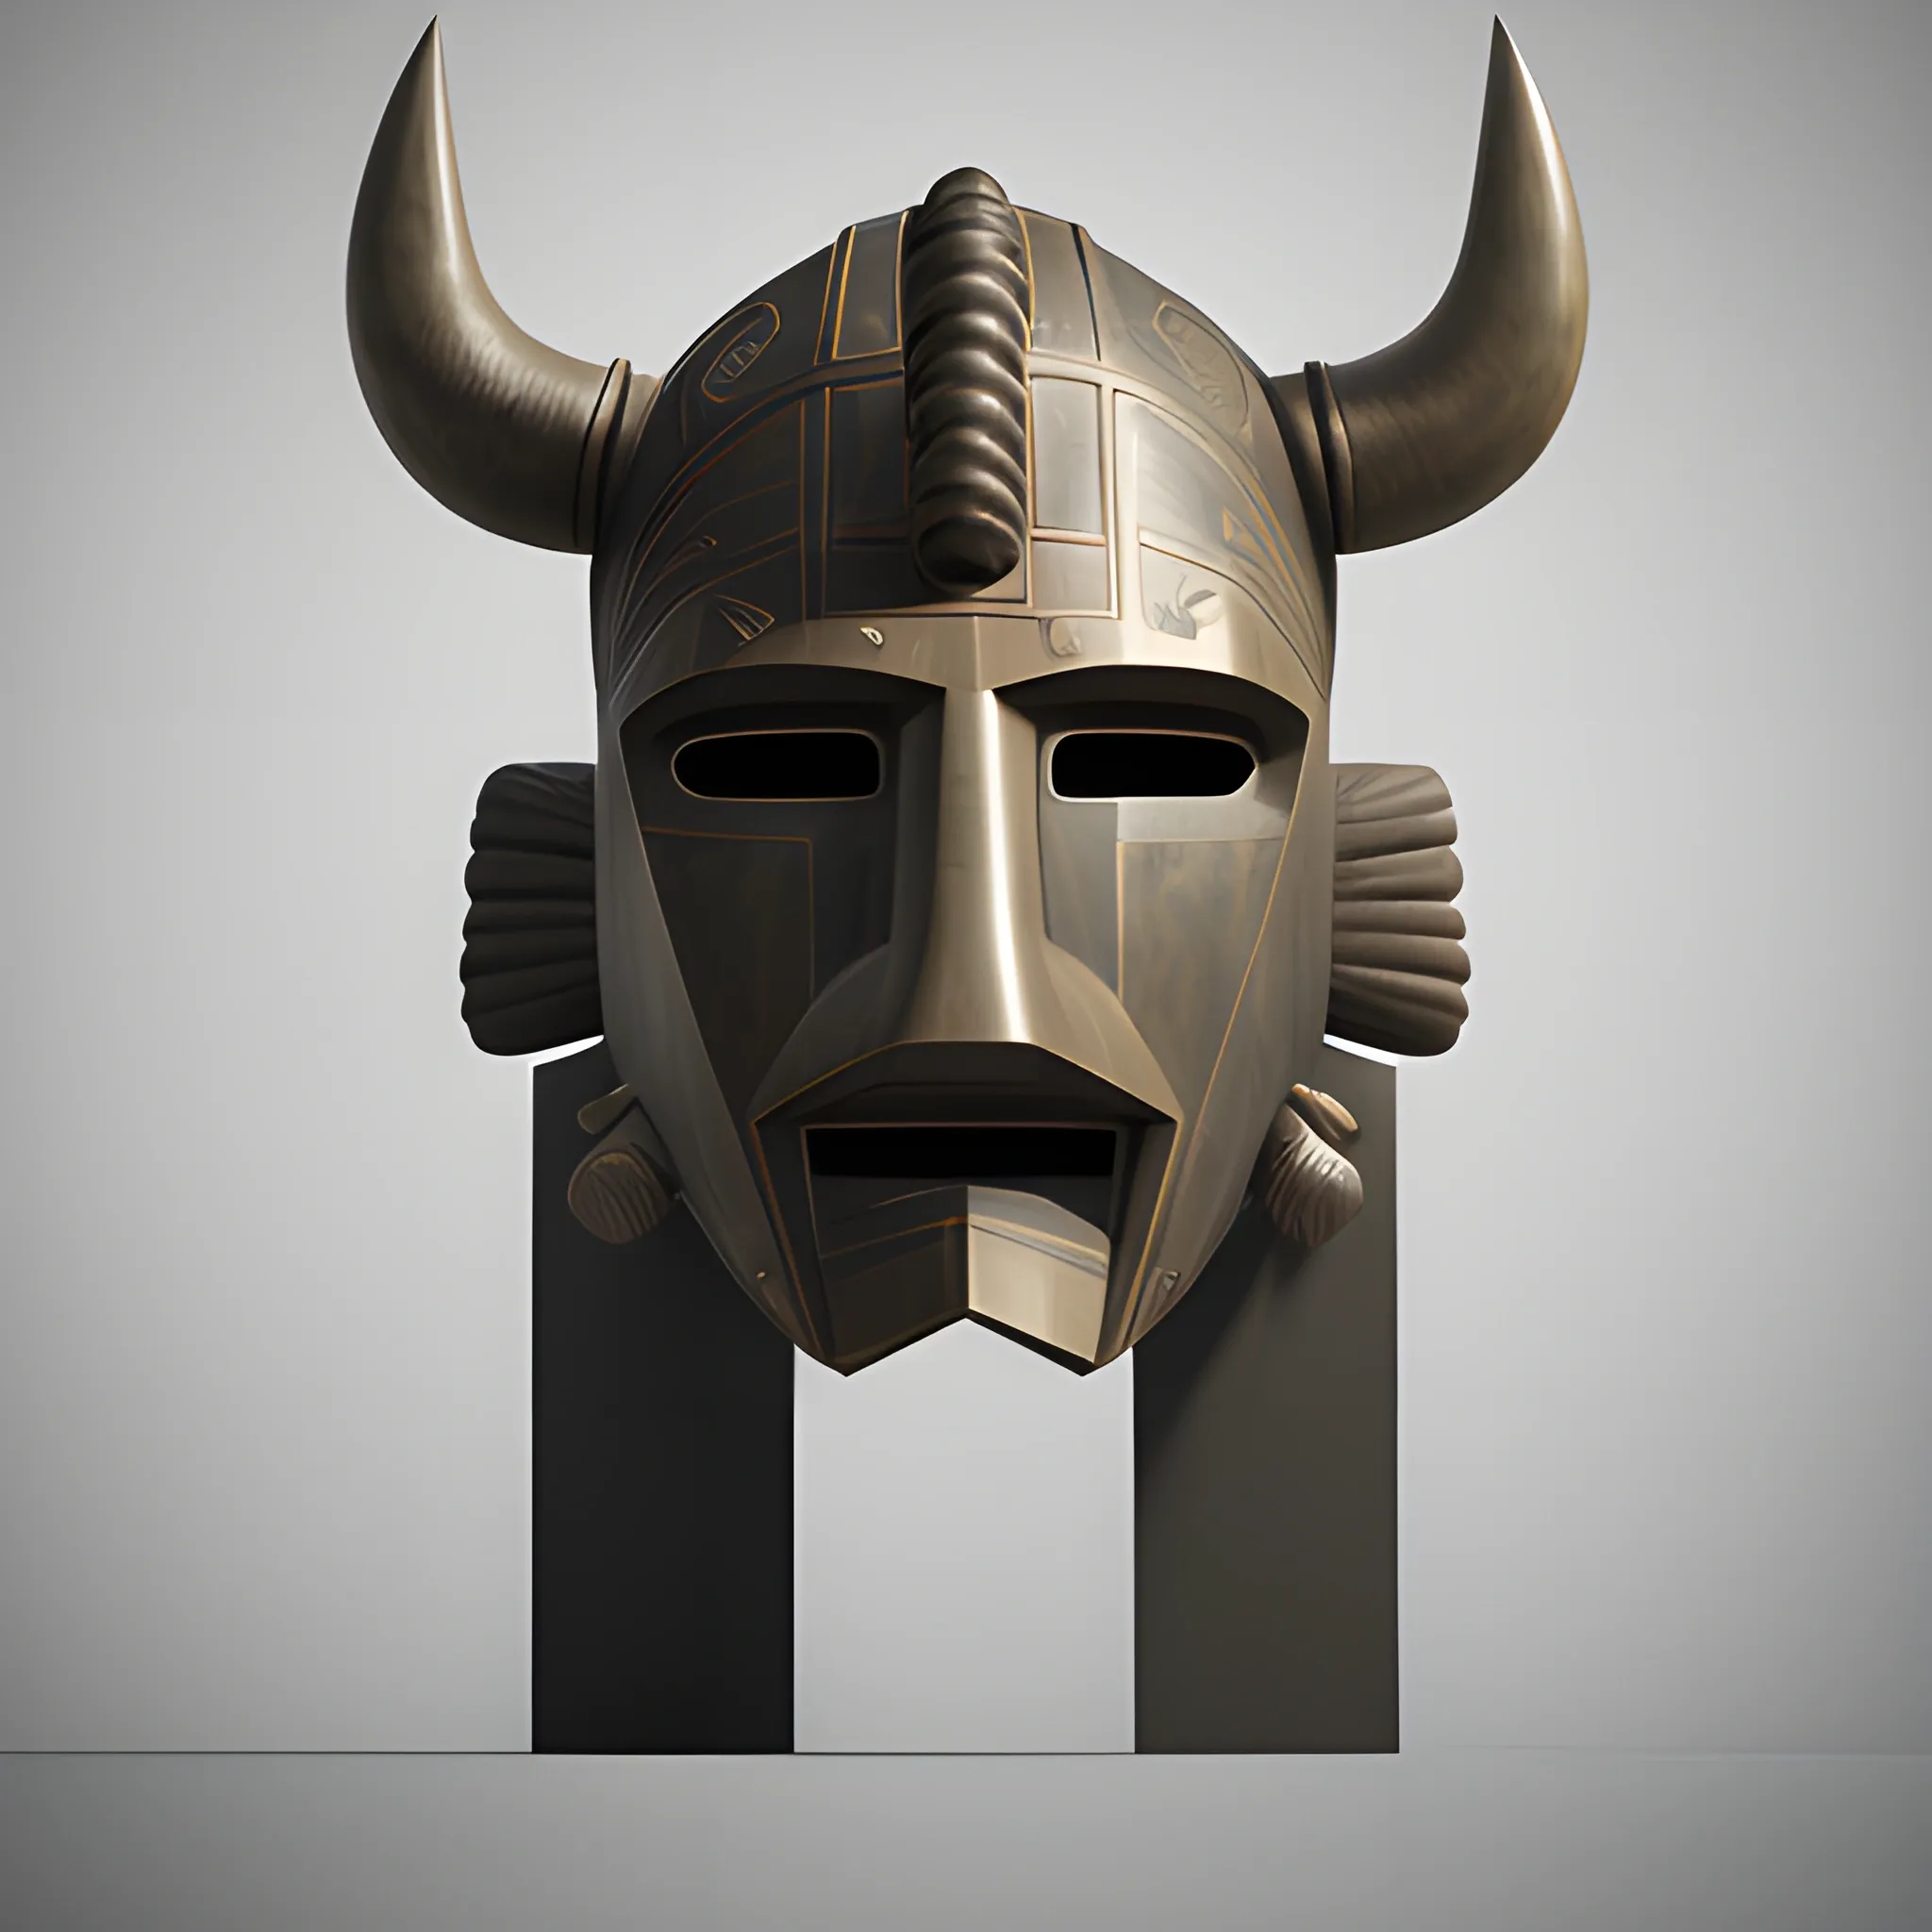 sculptural set in Brancusi style , Big metalical Bison featured native polynesian mask, gear and riveted steel,  digital matte realistic surface,  sharp focus, elegant intricate digital painting, abstract concept, art global illumination, ray tracing advanced technology, simple composition, elegant shapes, glam monumental, low perspective look

